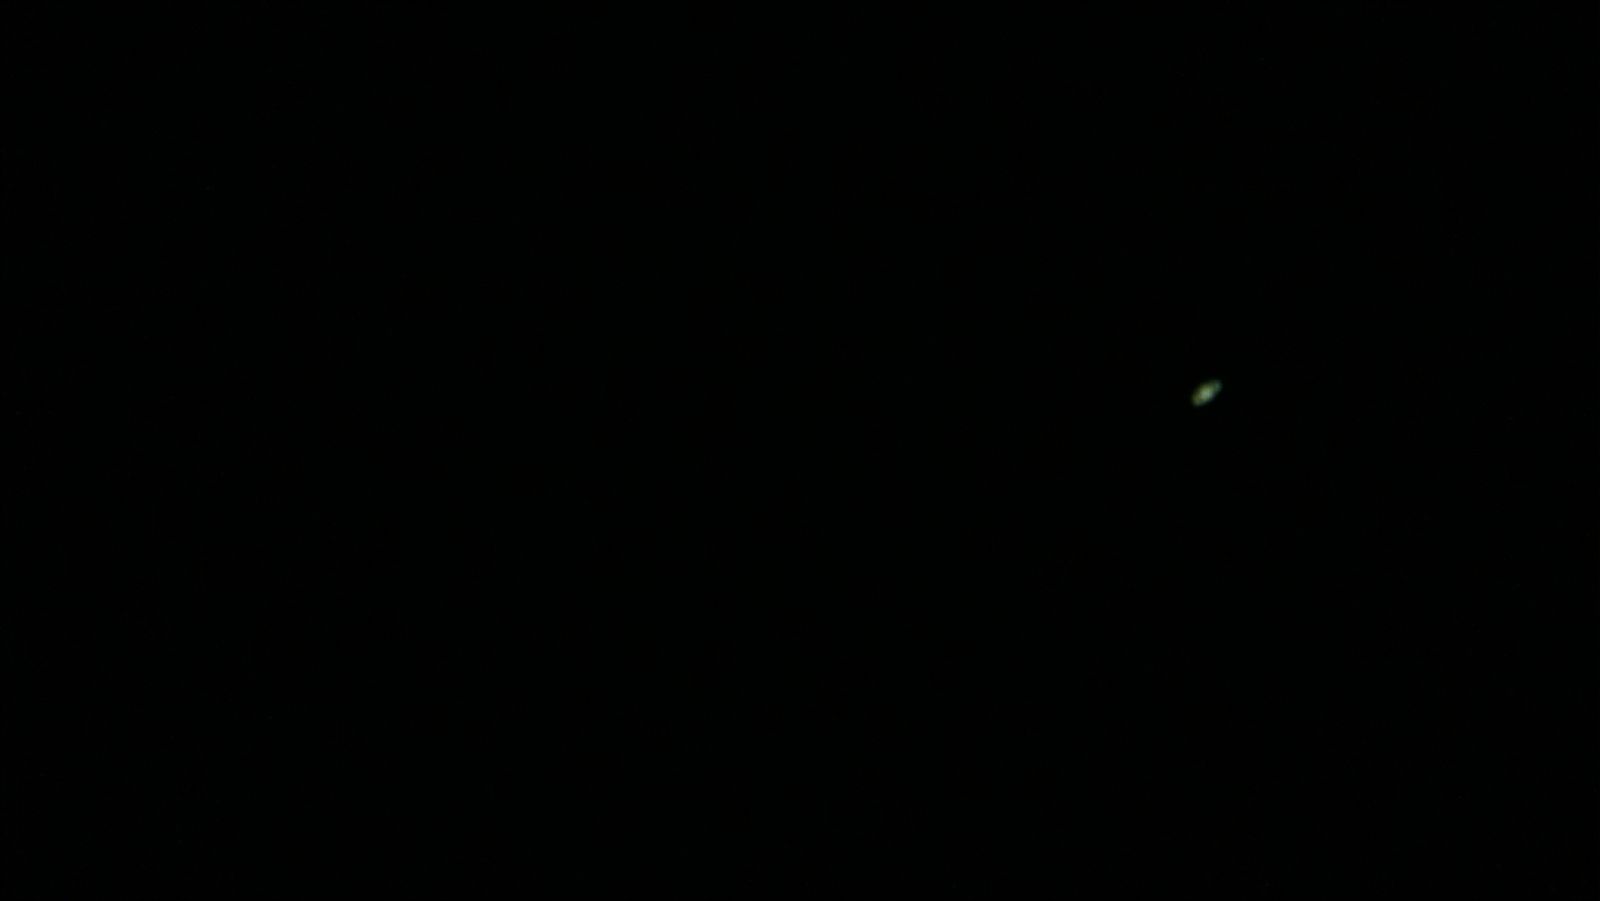 Pic made with 8megapixel phone against the eyepiece opening.